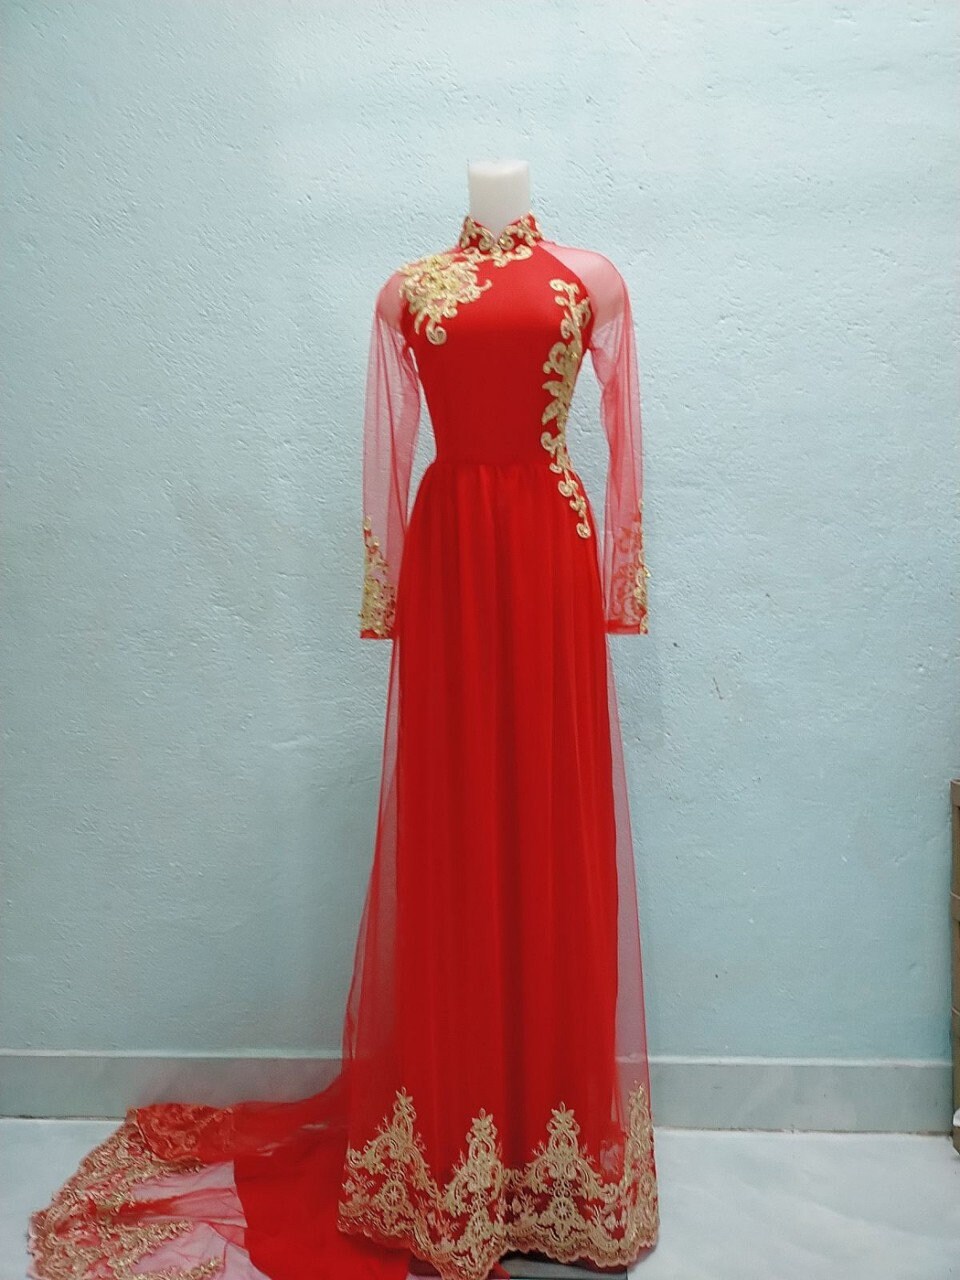 A traditional Vietnamese dress is the ao dai, primarily worn by